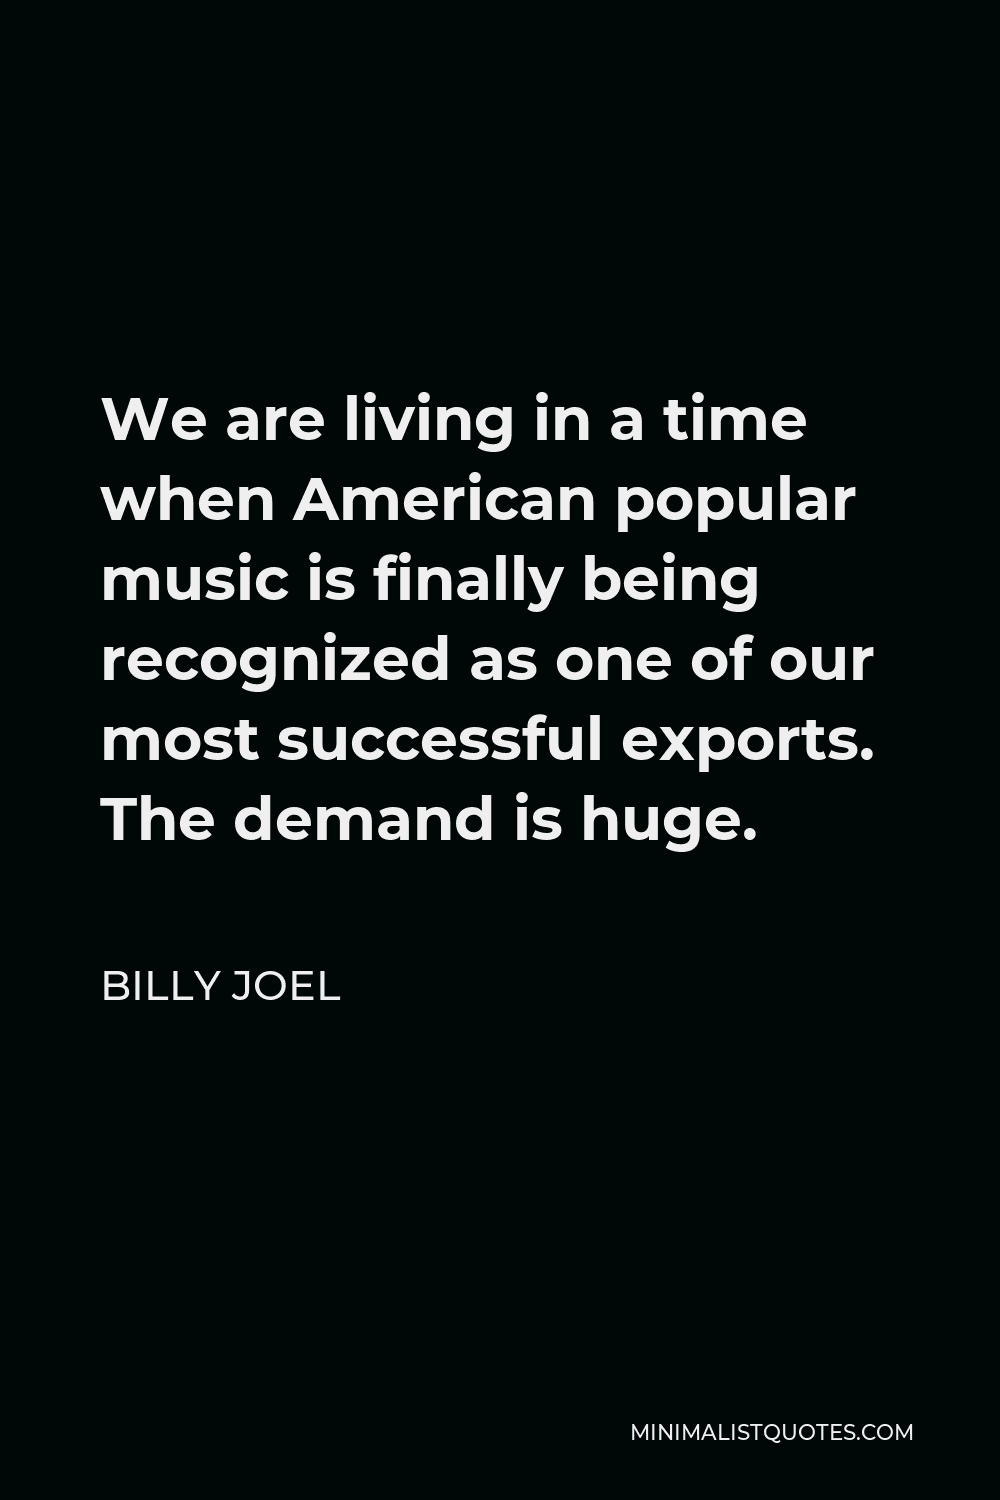 Billy Joel Quote - We are living in a time when American popular music is finally being recognized as one of our most successful exports. The demand is huge.